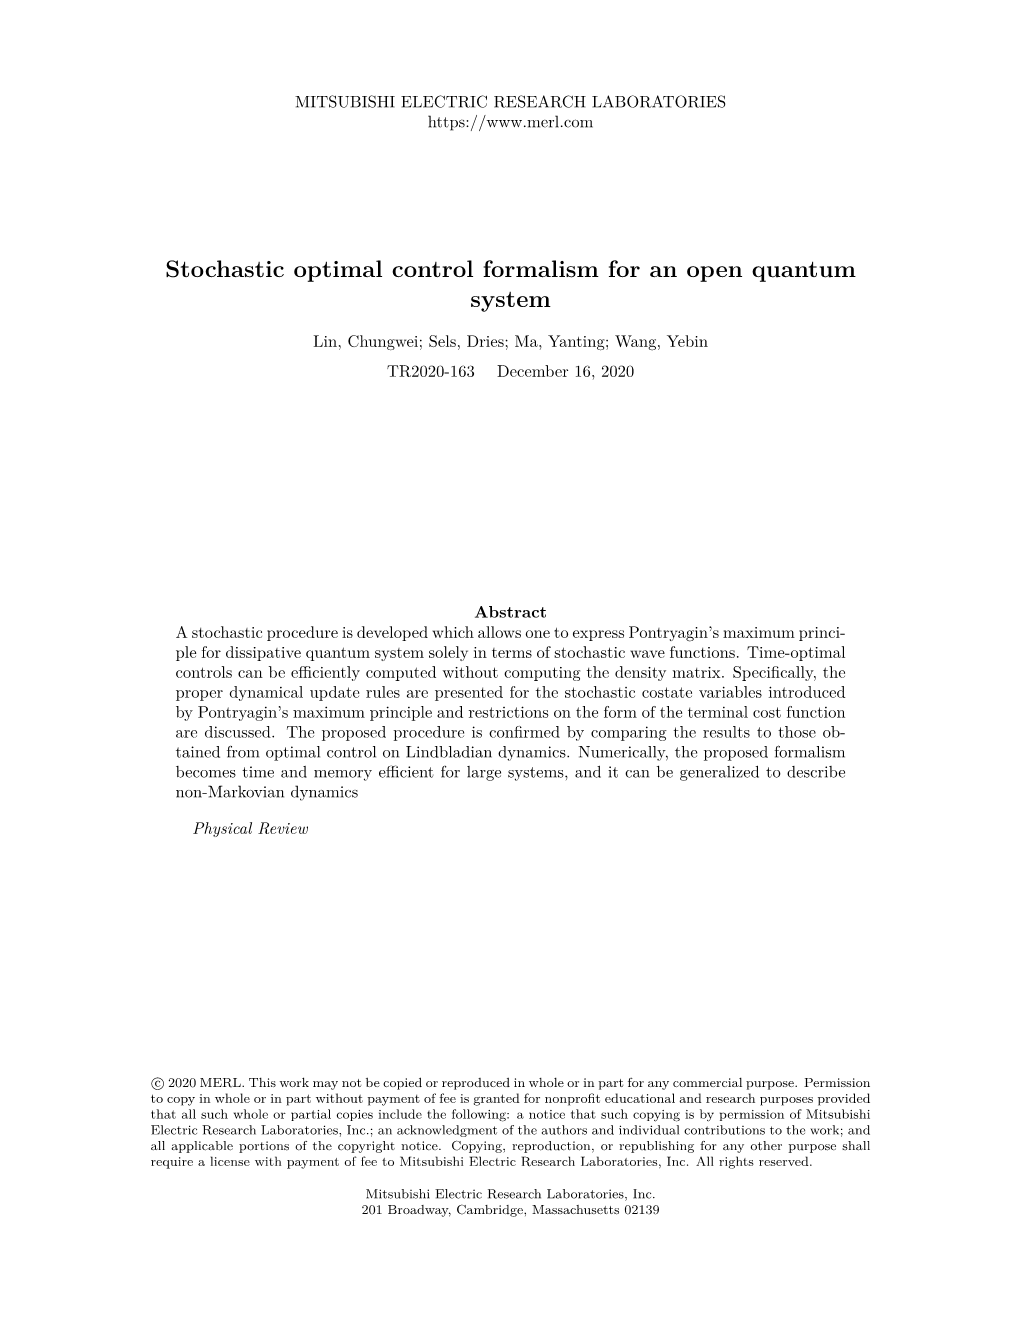 Stochastic Optimal Control Formalism for an Open Quantum System /Author=Lin, Chungwei; Sels, Dries; Ma, Yanting; Wang, Yebin